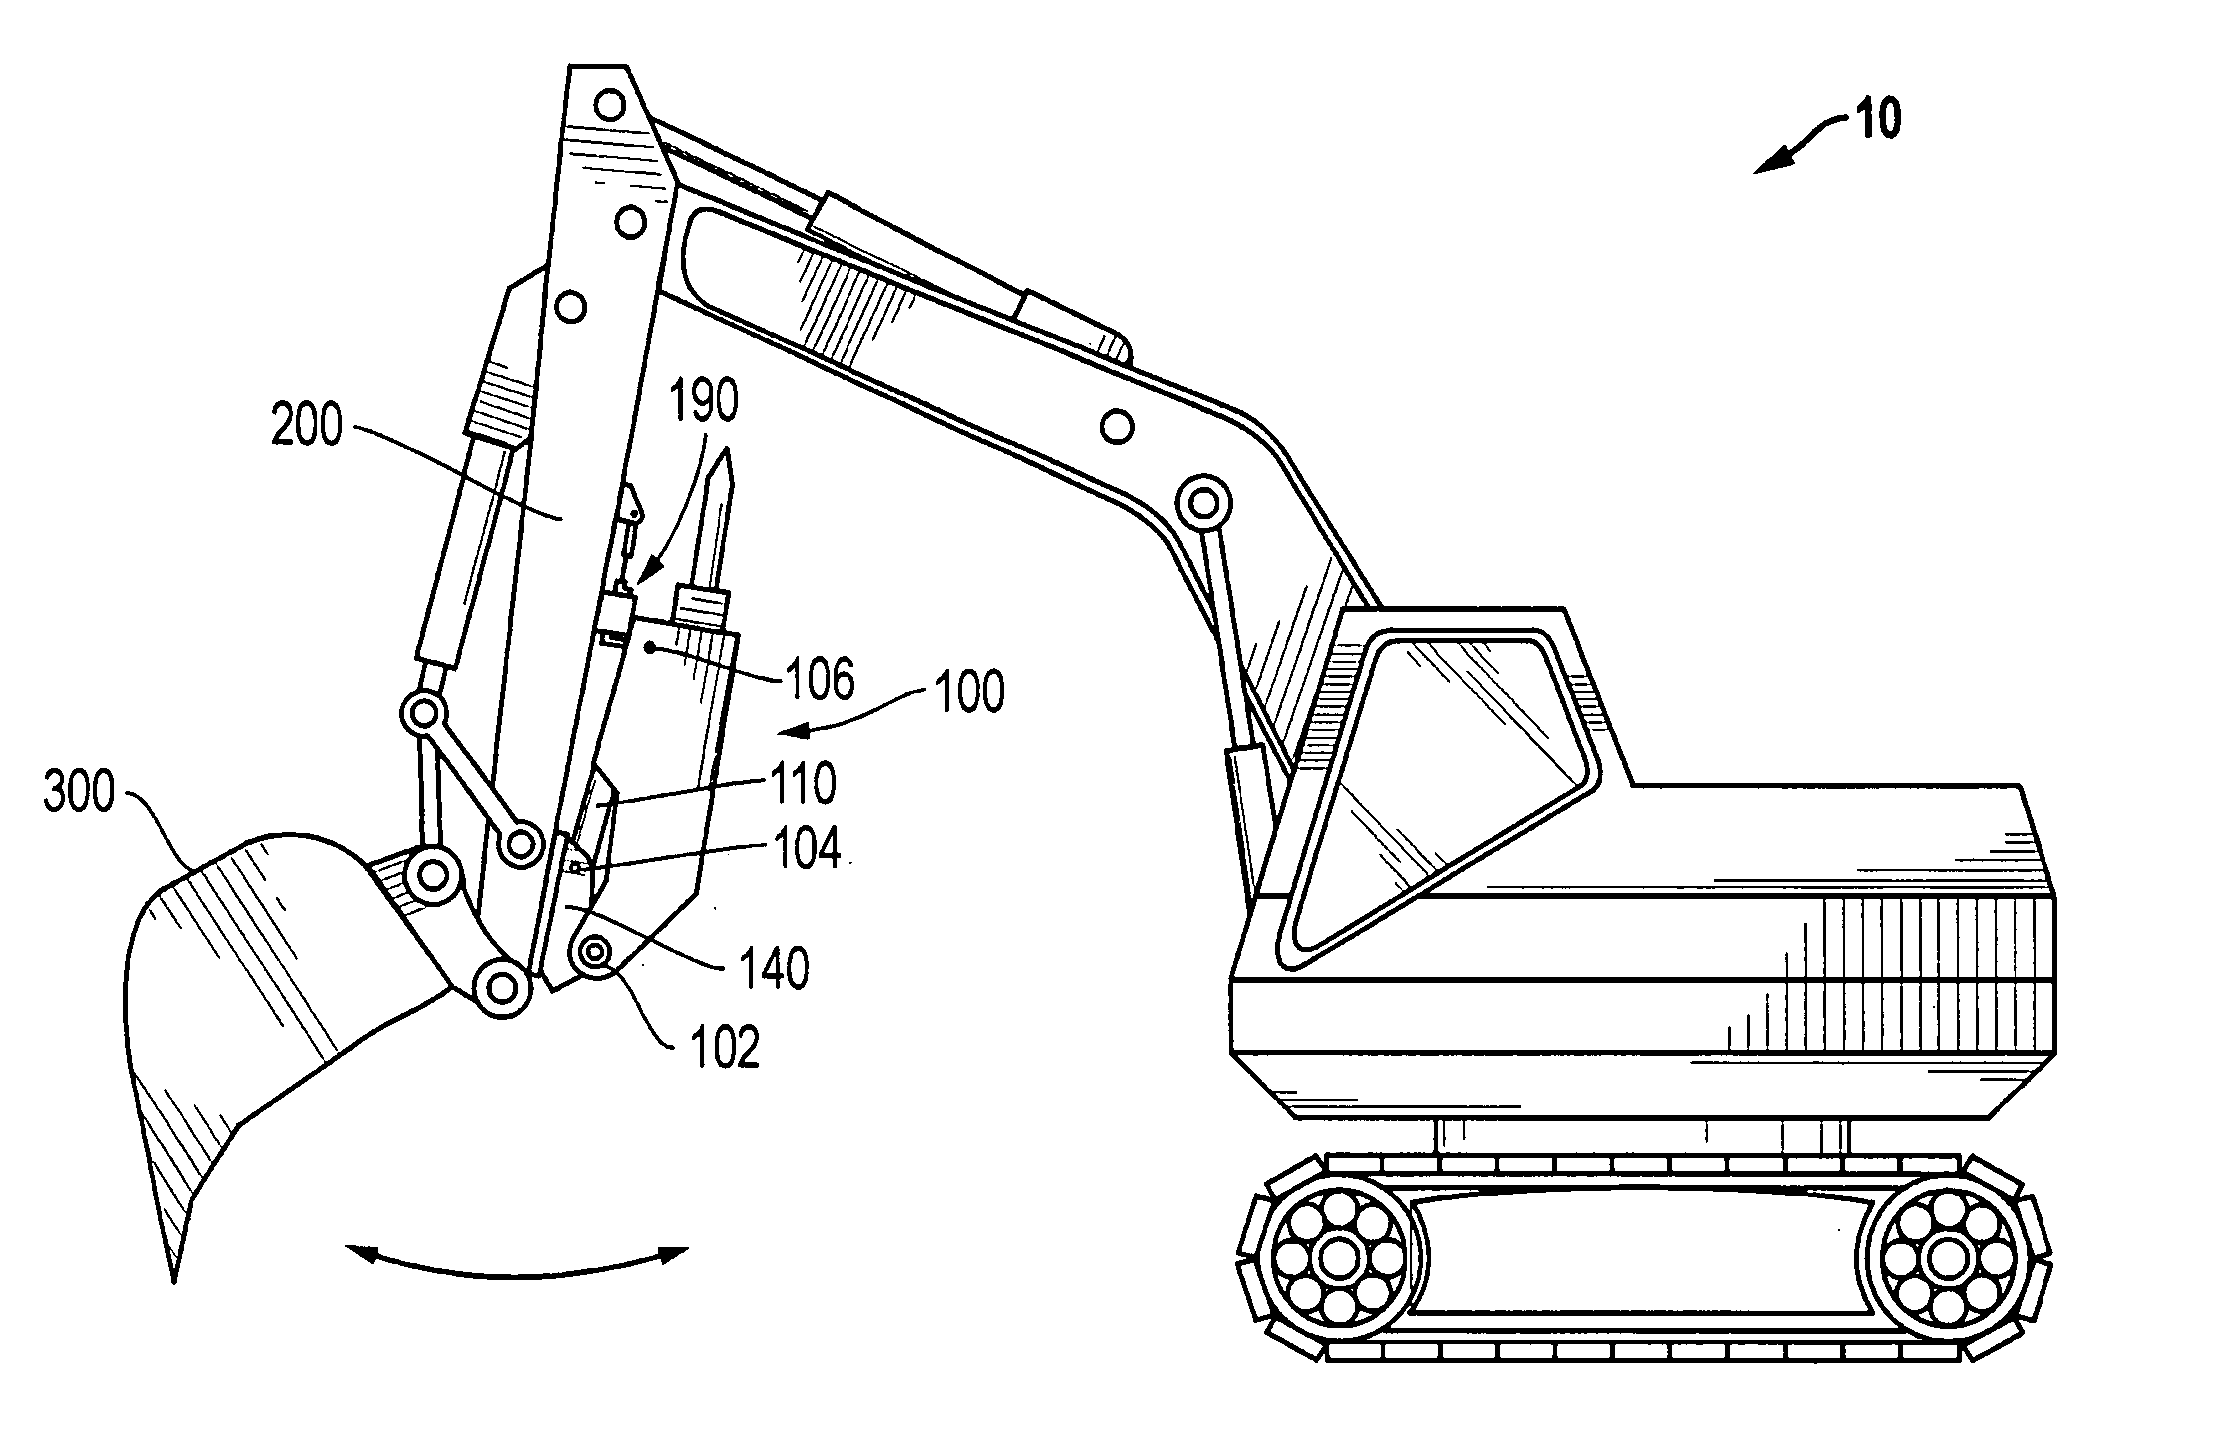 Impact resistant breaker deployment system for an excavating machine